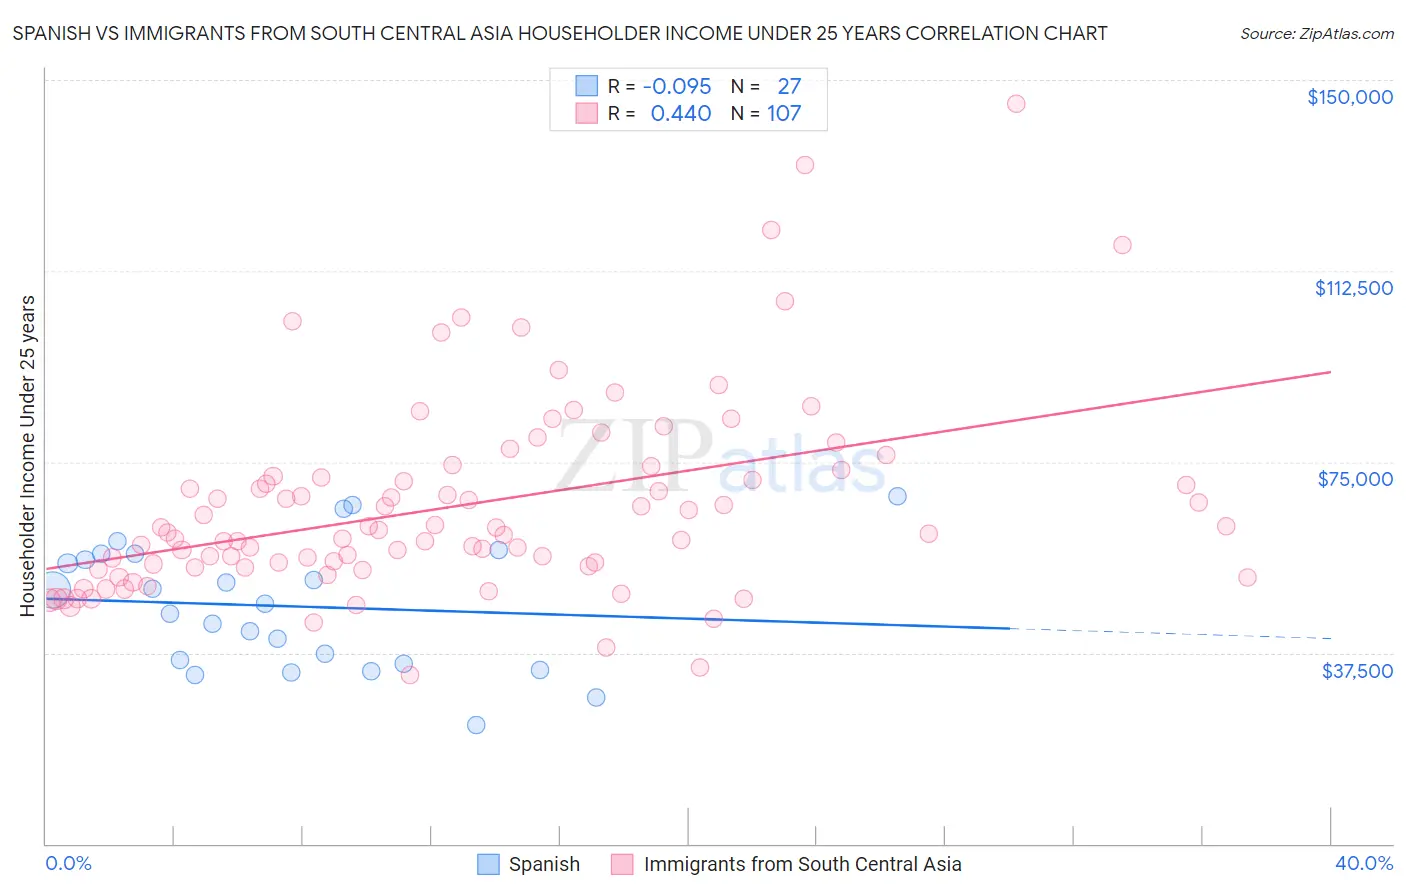 Spanish vs Immigrants from South Central Asia Householder Income Under 25 years